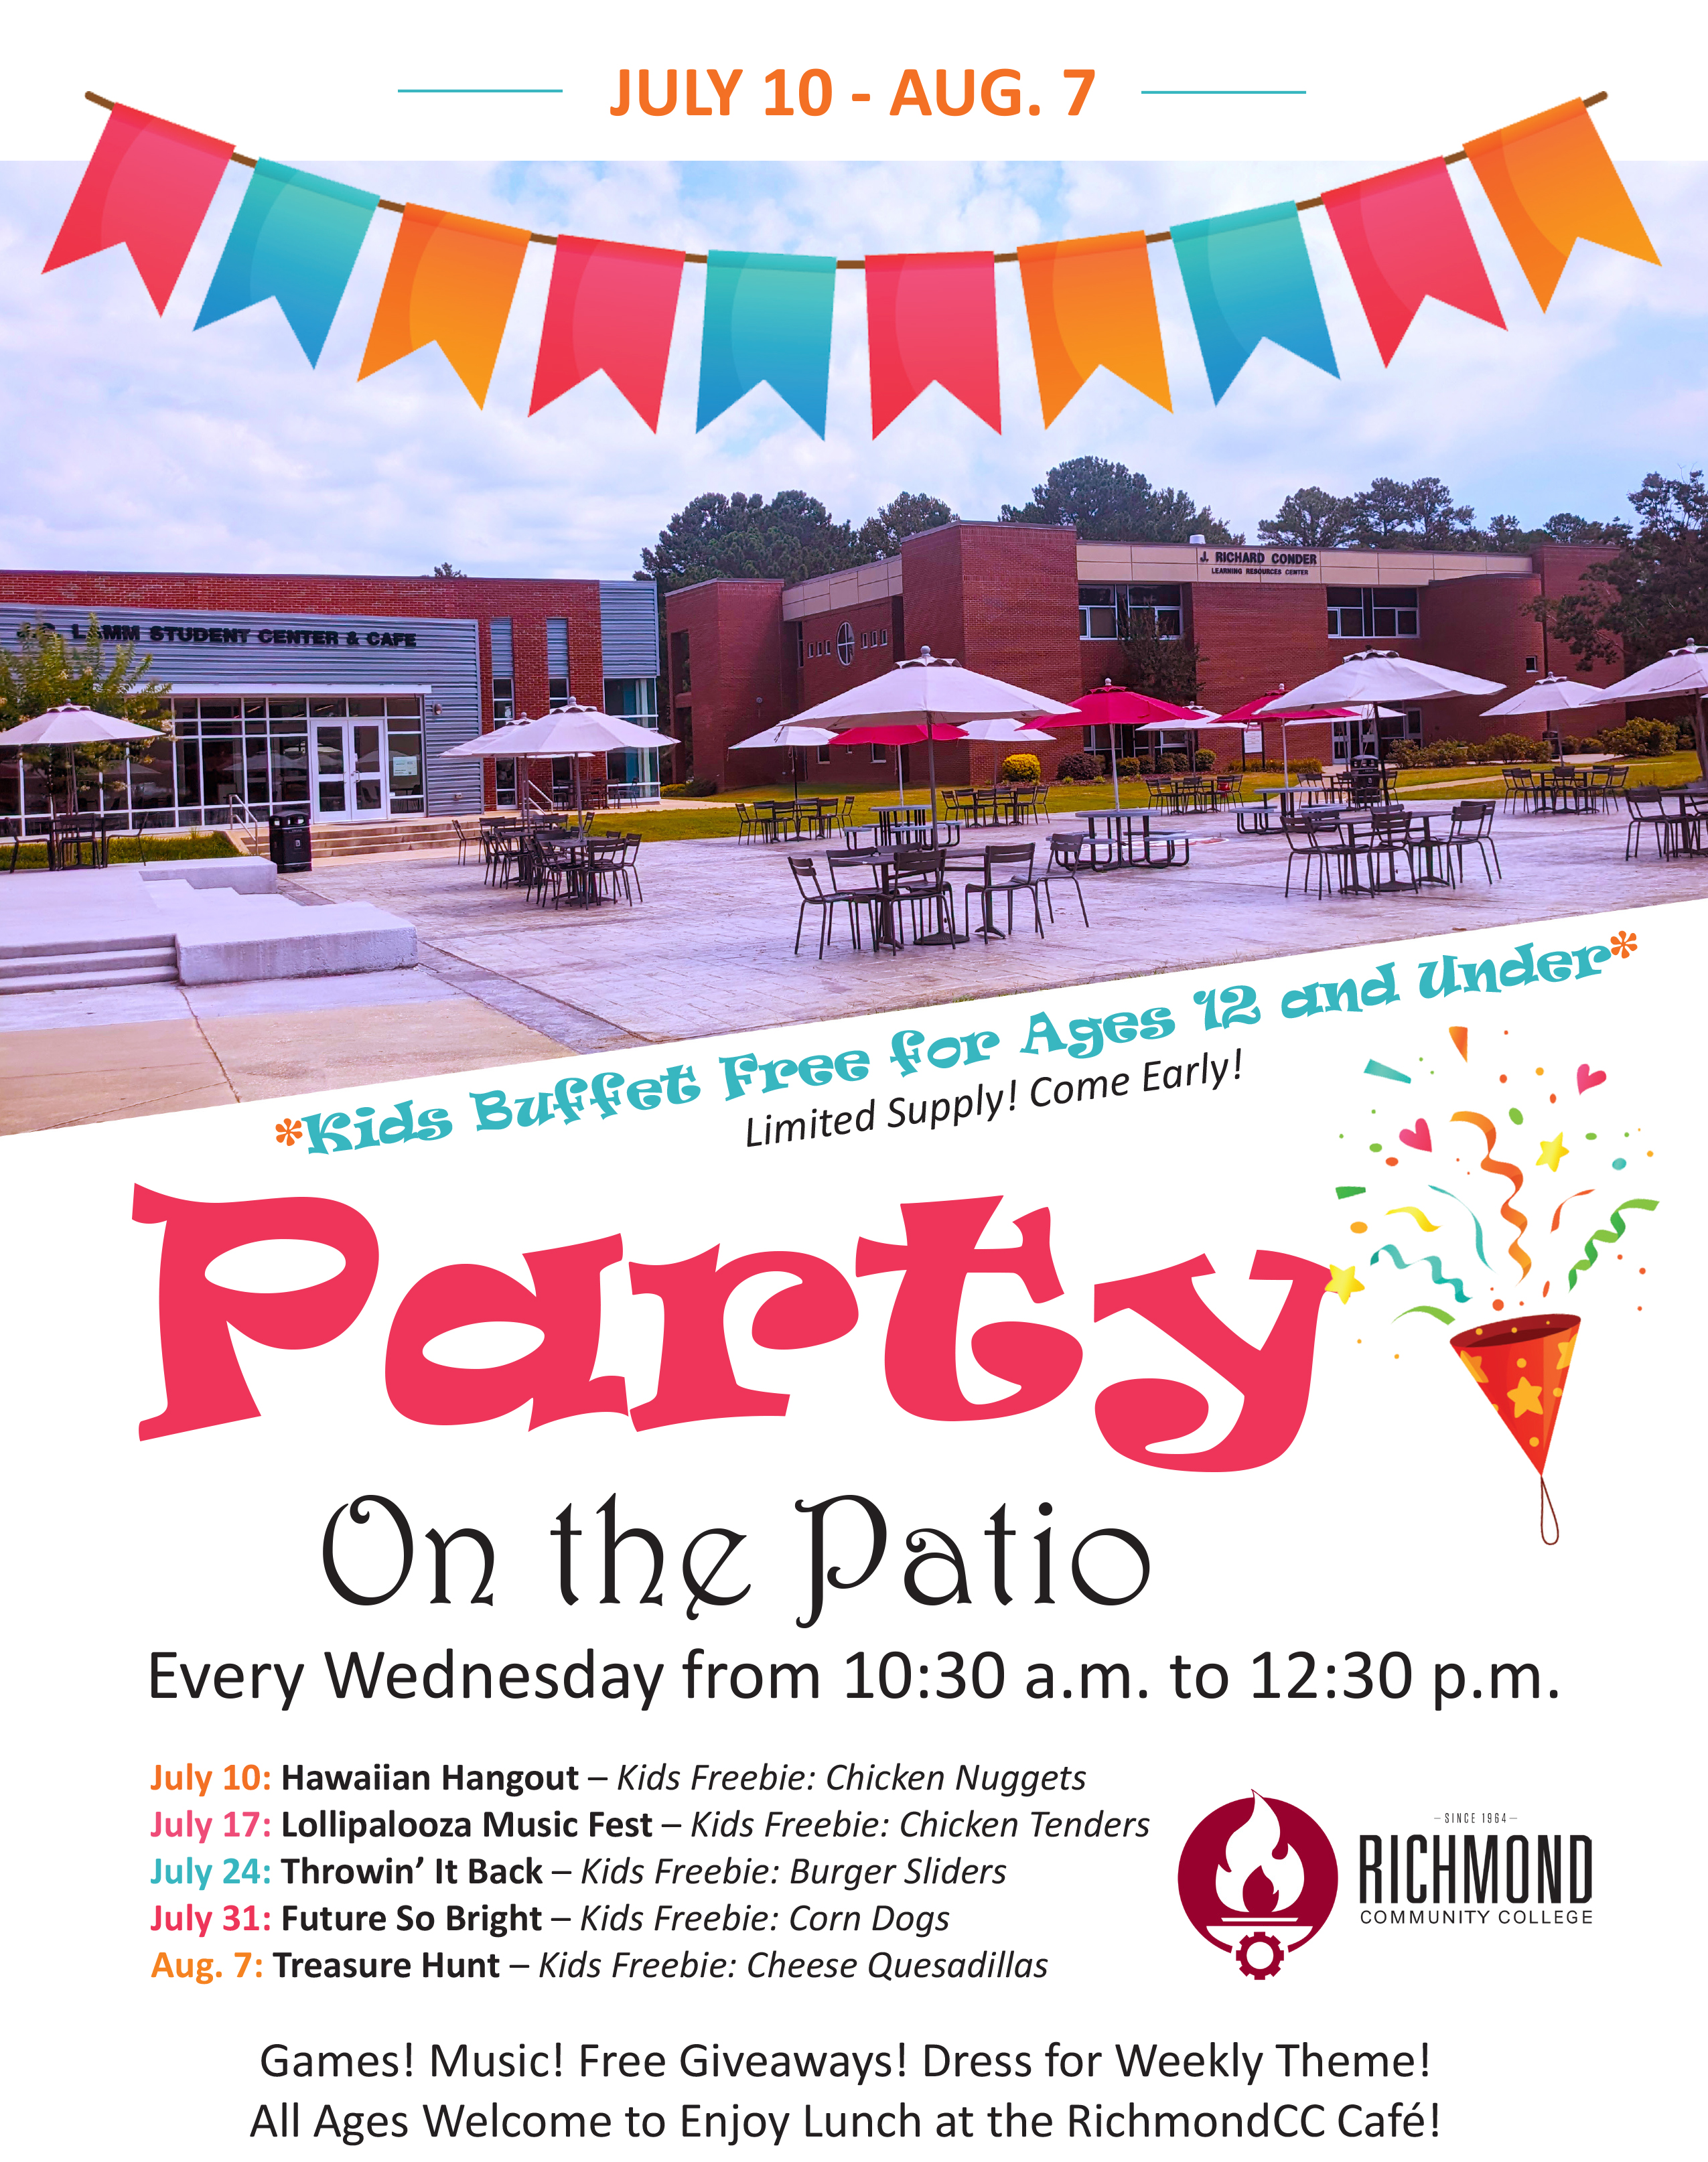 Party on the Patio every Wednesday from July 10 - Aug. 7 from 10:30 a.m. to 12:30 p.m. at the RichmondCC Cafe.